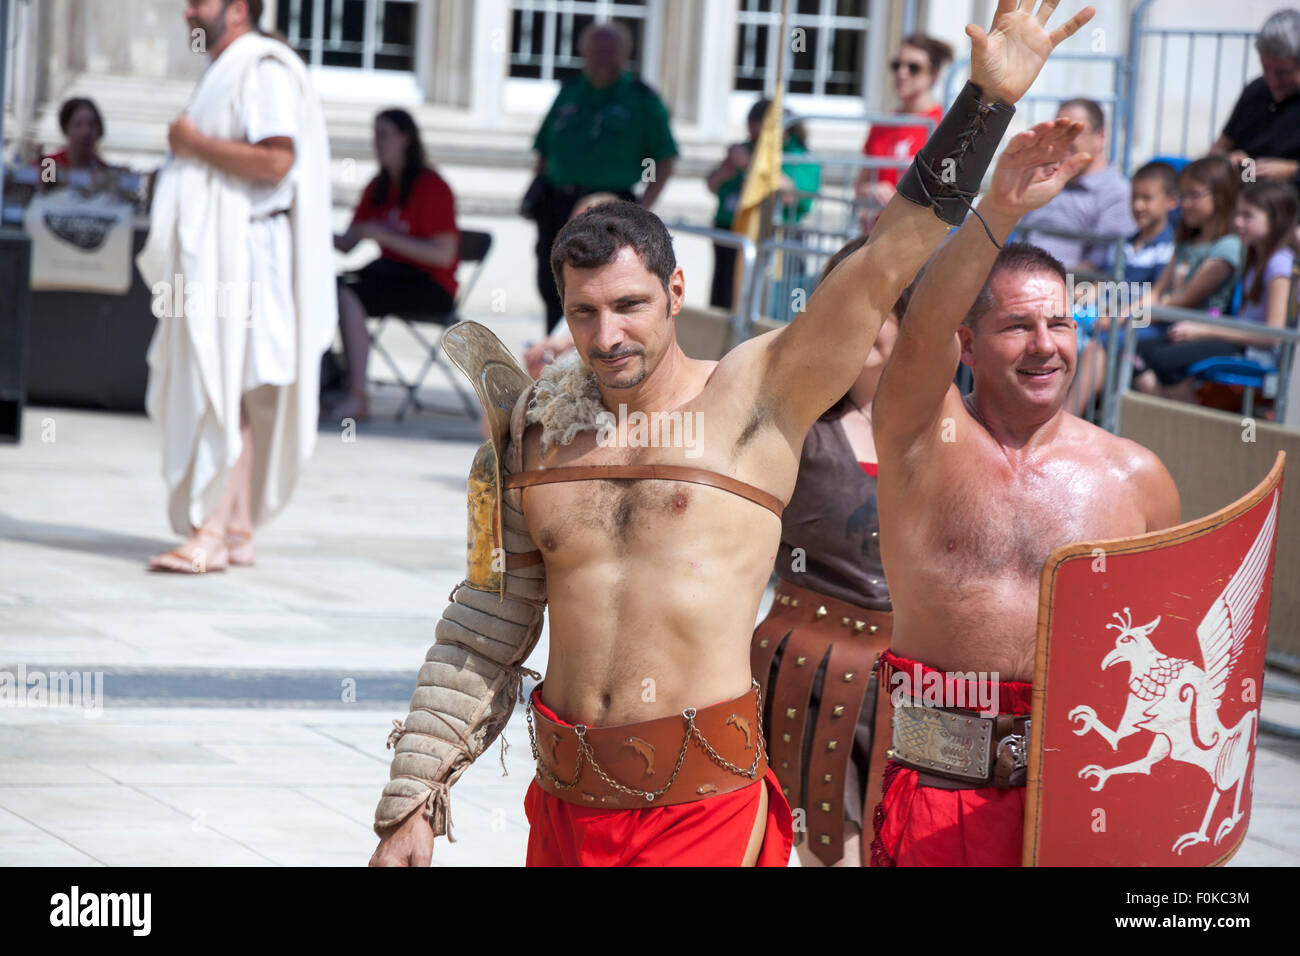 London, UK. 16th August, 2015. Live action Gladiator show at the Guildhall Yard. Professional gladiators battle it out in Guildhall Yard, the site of London's only Roman amphitheatre. The reconstructions of the gladiator-style games once held in ancient Londinium took place before an emperor and cheerful crowd who decide which warrior will get to walk free based on their performance. Credit: Nathaniel Noir/Alamy Live News Stock Photo